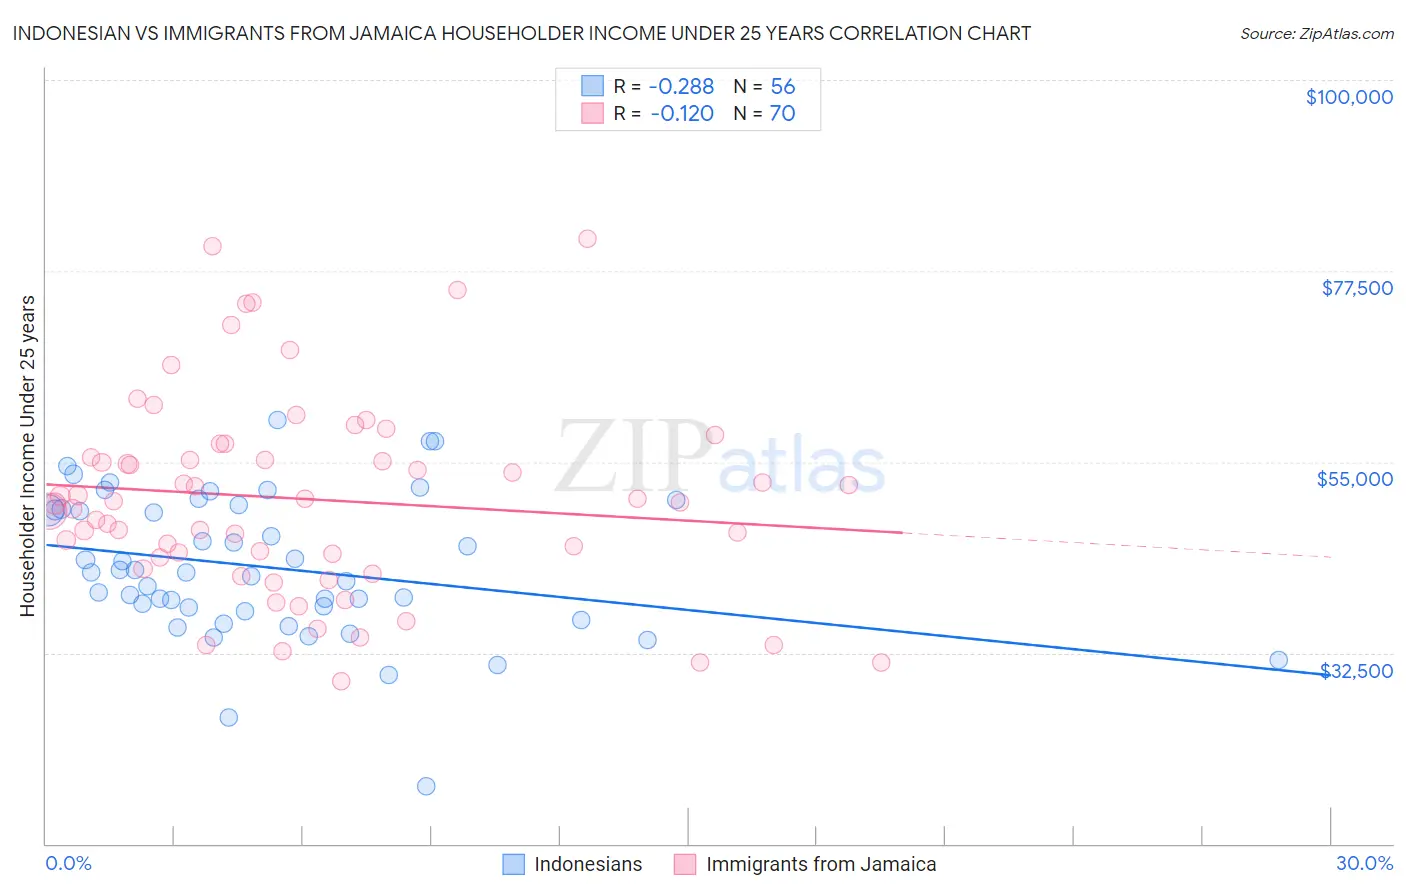 Indonesian vs Immigrants from Jamaica Householder Income Under 25 years